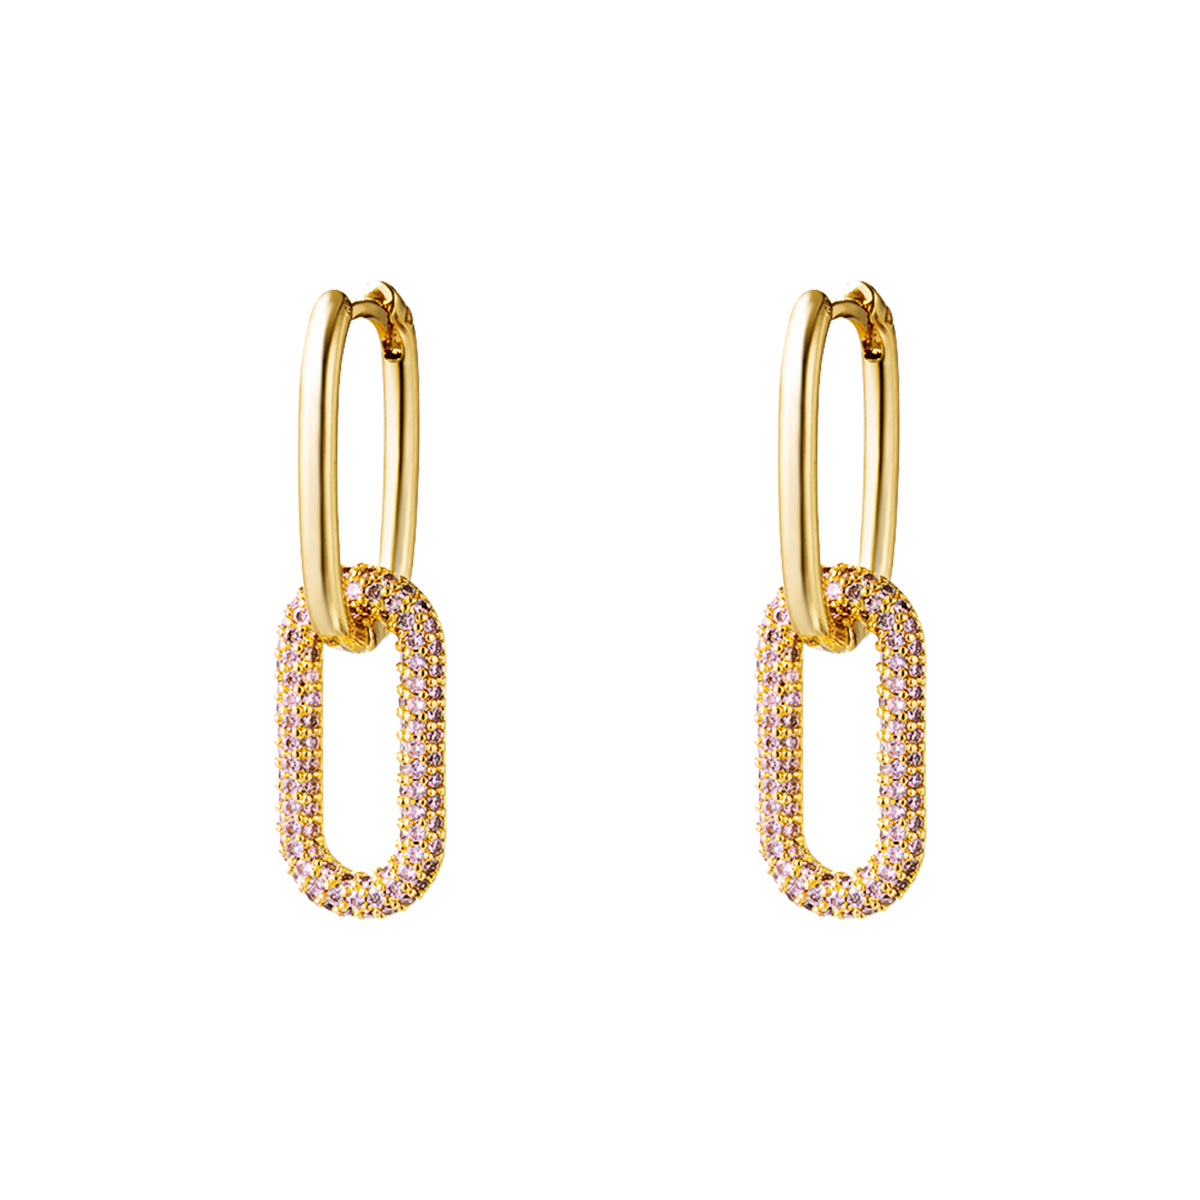 Copper linked earrings with zircon stones - Small